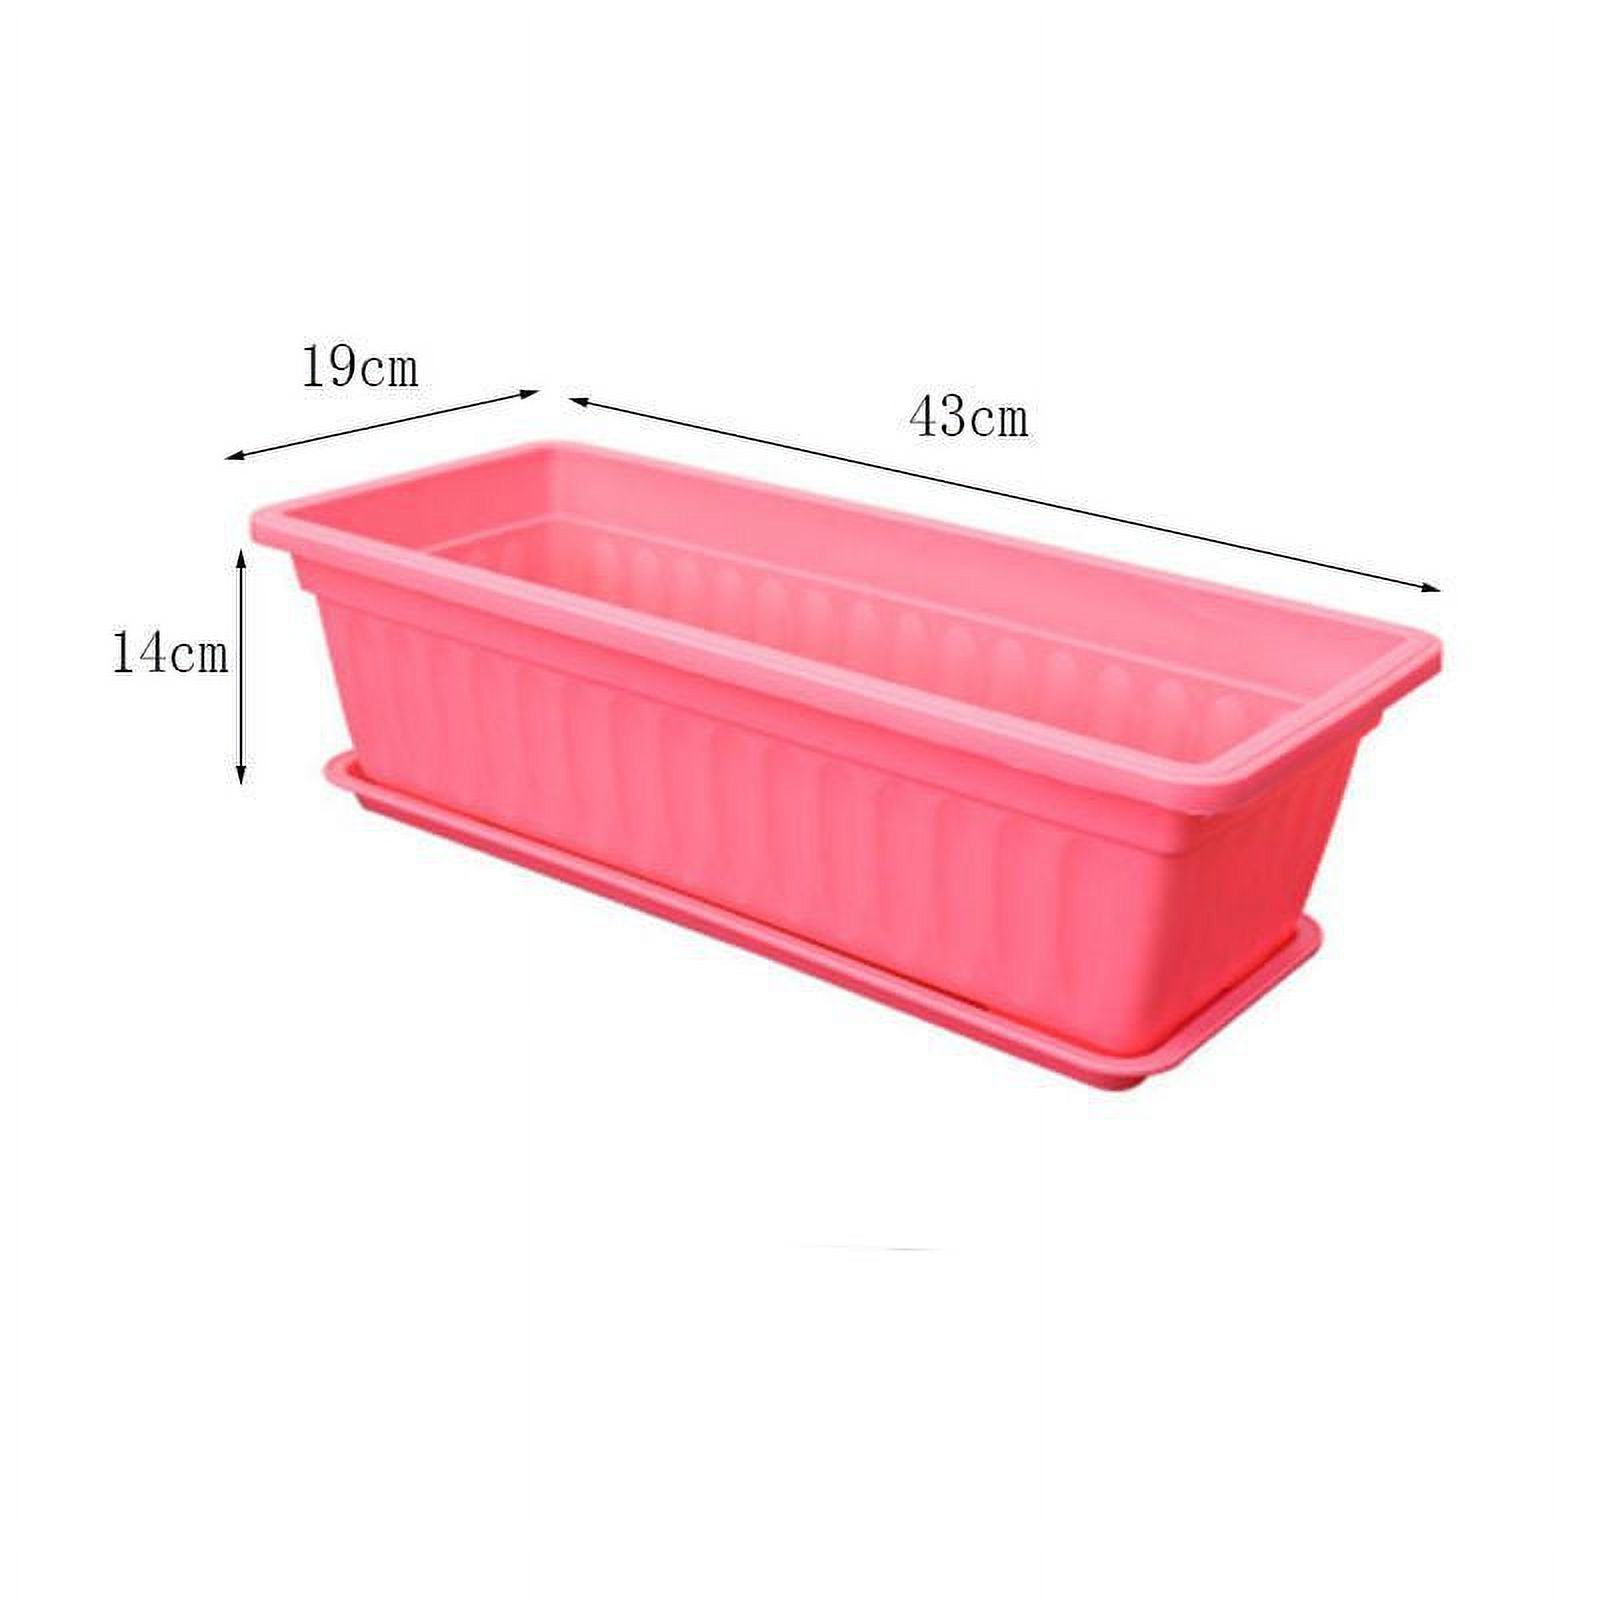 17 Inch Rectangular Plastic Thicken Planters with Trays - Window Planter Box for Outdoor and Indoor Herbs, Vegetables, Flowers and Succulent Plants (1 Pack,Pink) - image 2 of 8